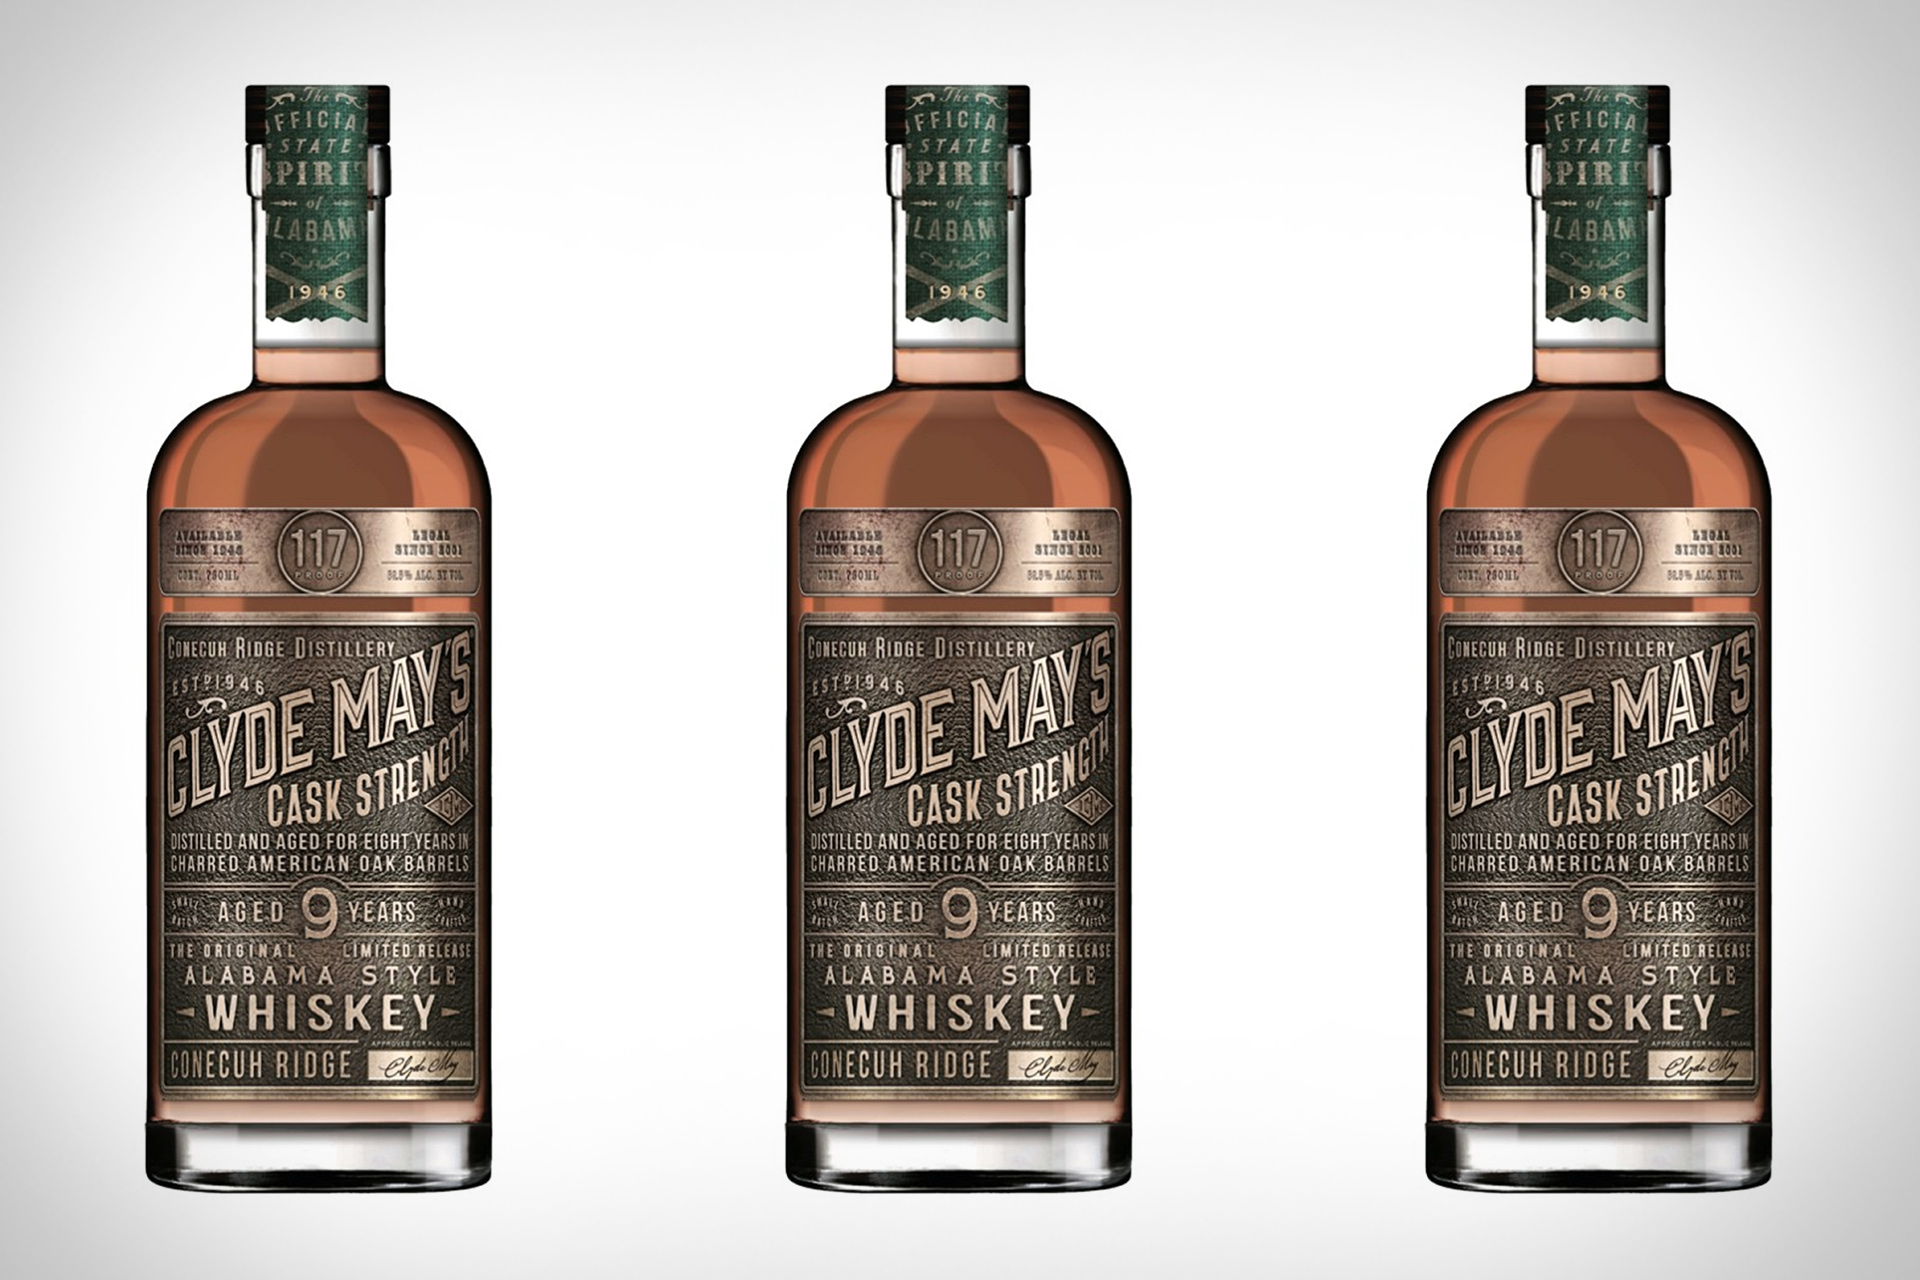 Clyde May's 9-year Cask Strength Whiskey